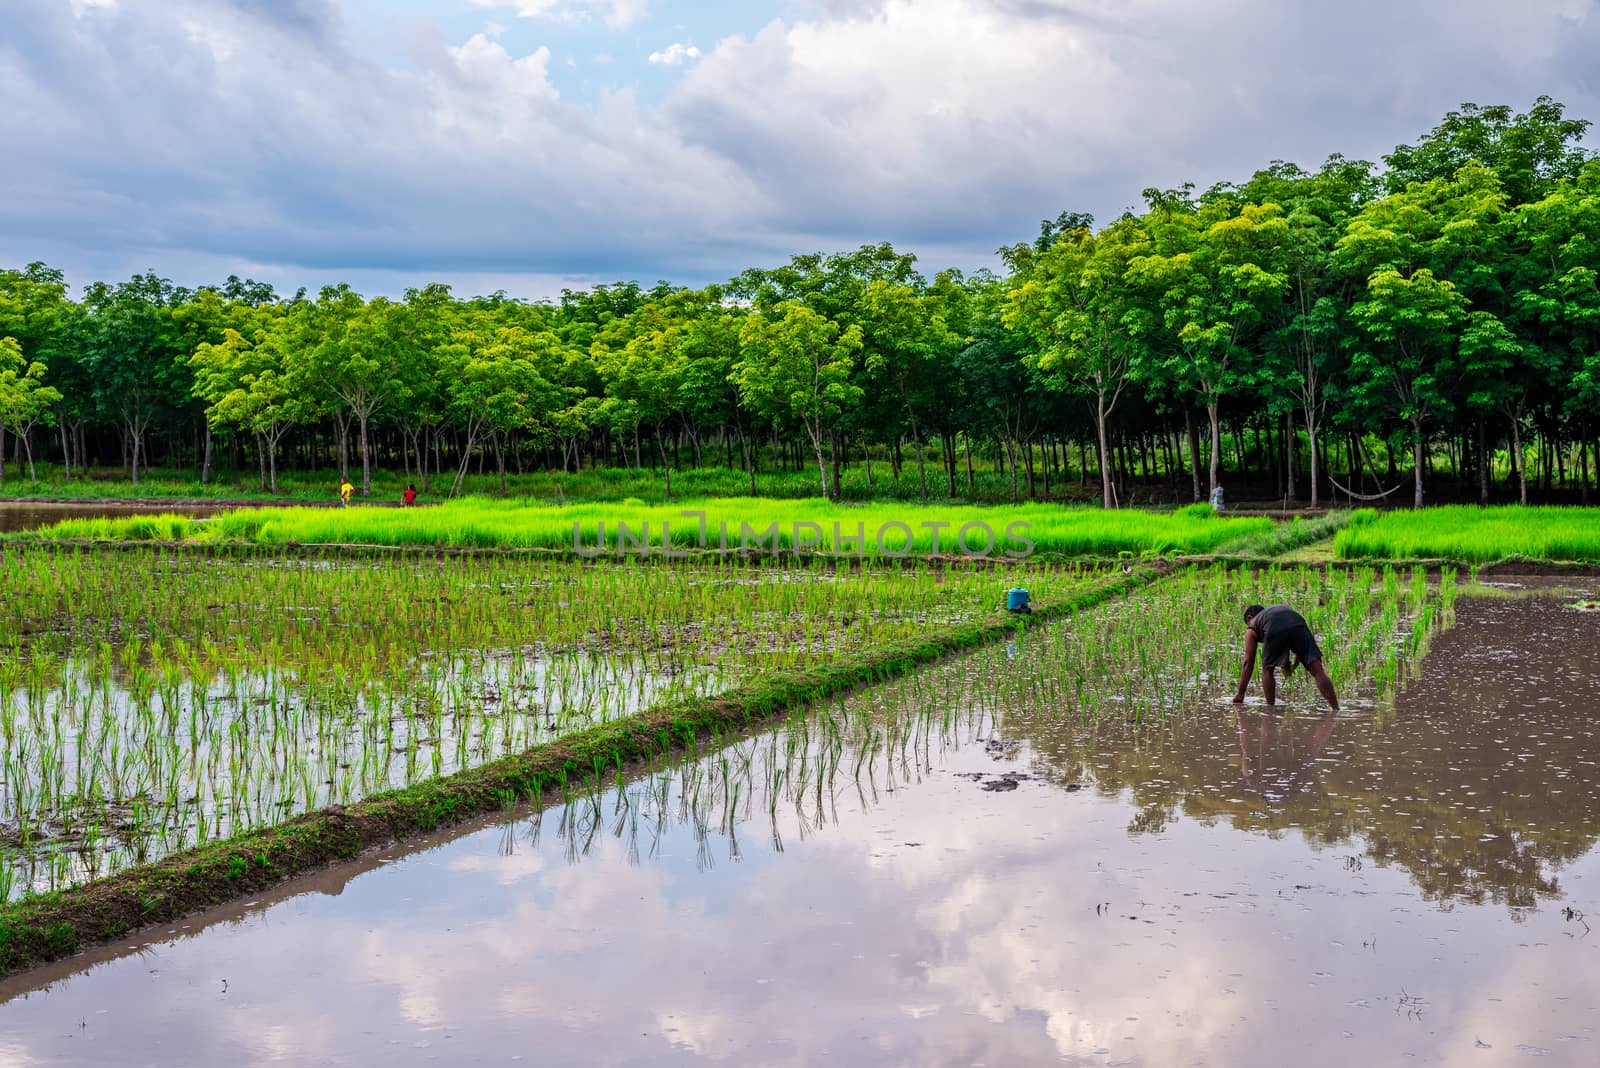 Rice field, Agriculture, paddy, with farmer by Suwanmanee